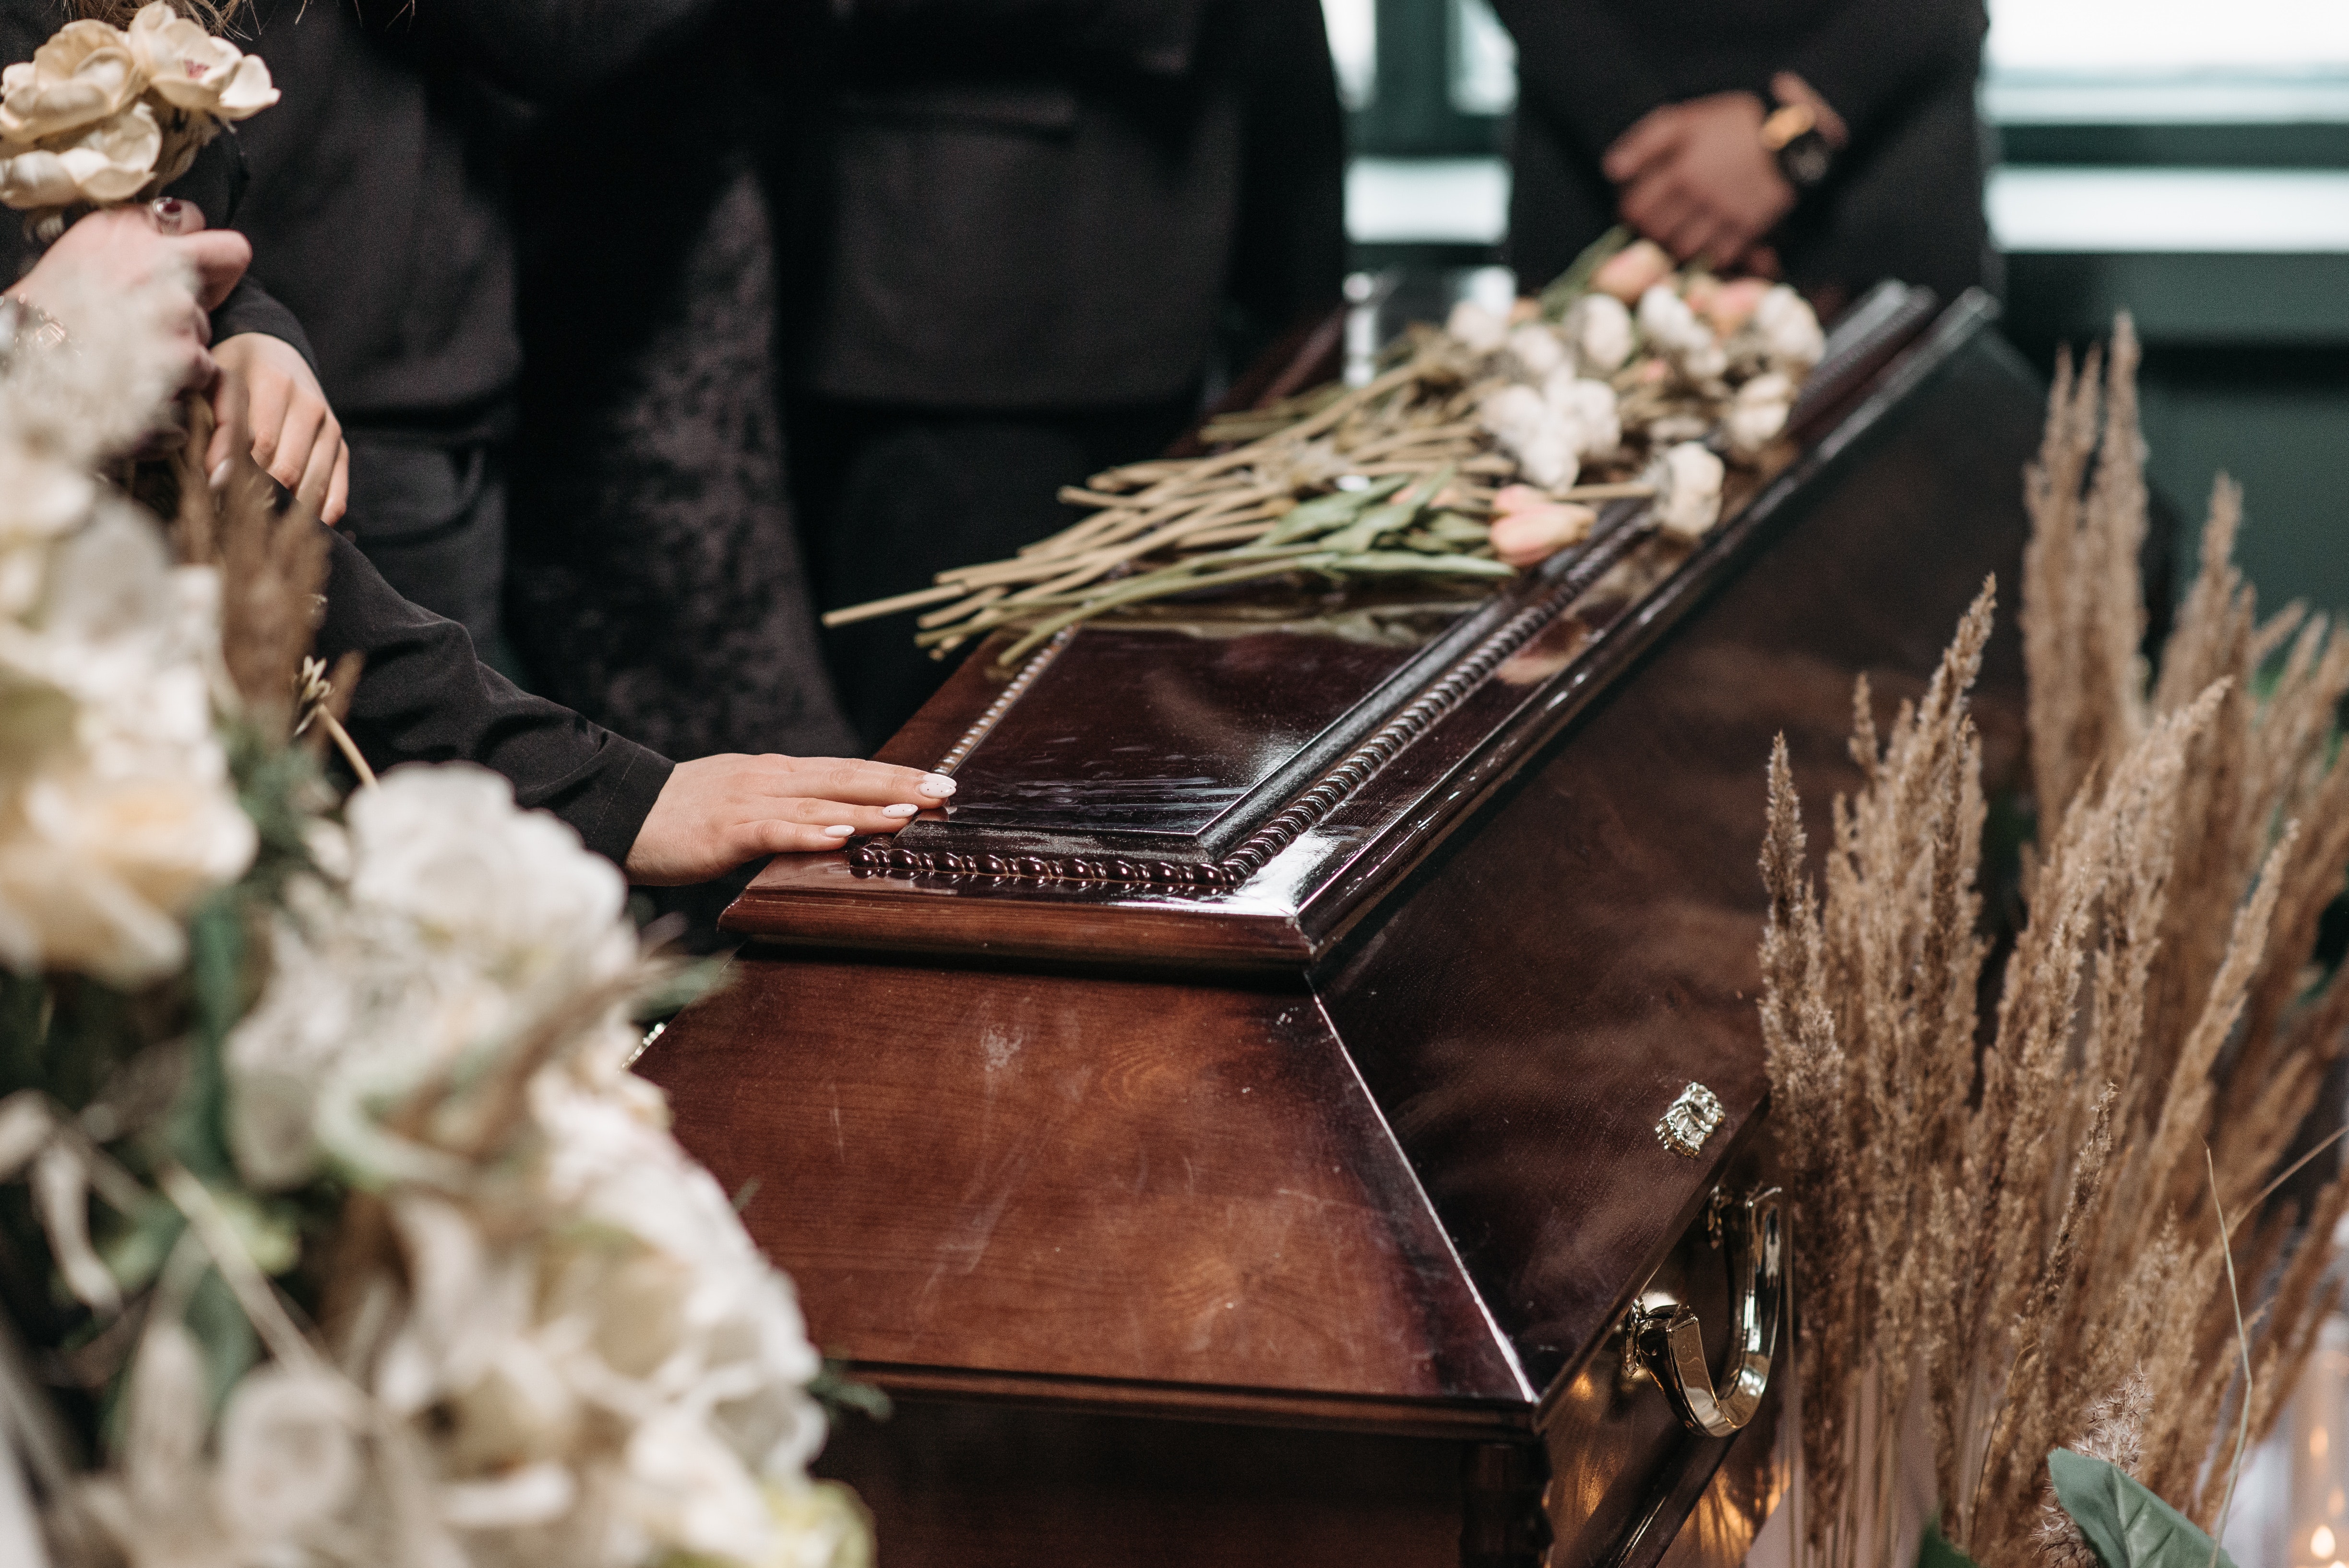 Can talking about death be less taboo?